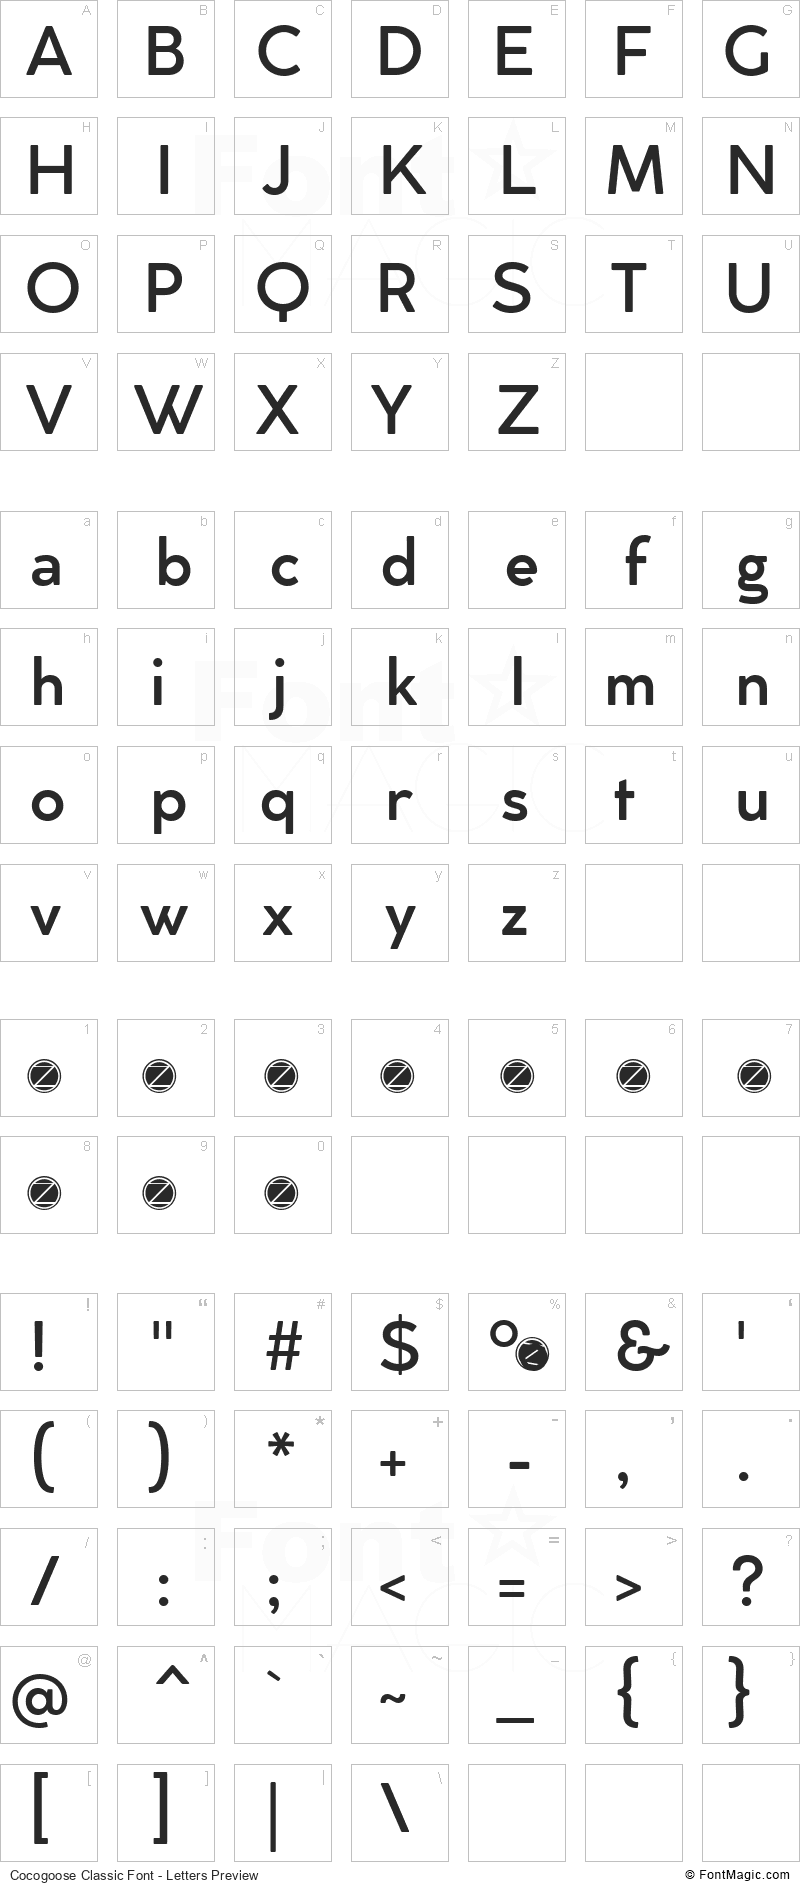 Cocogoose Classic Font - All Latters Preview Chart